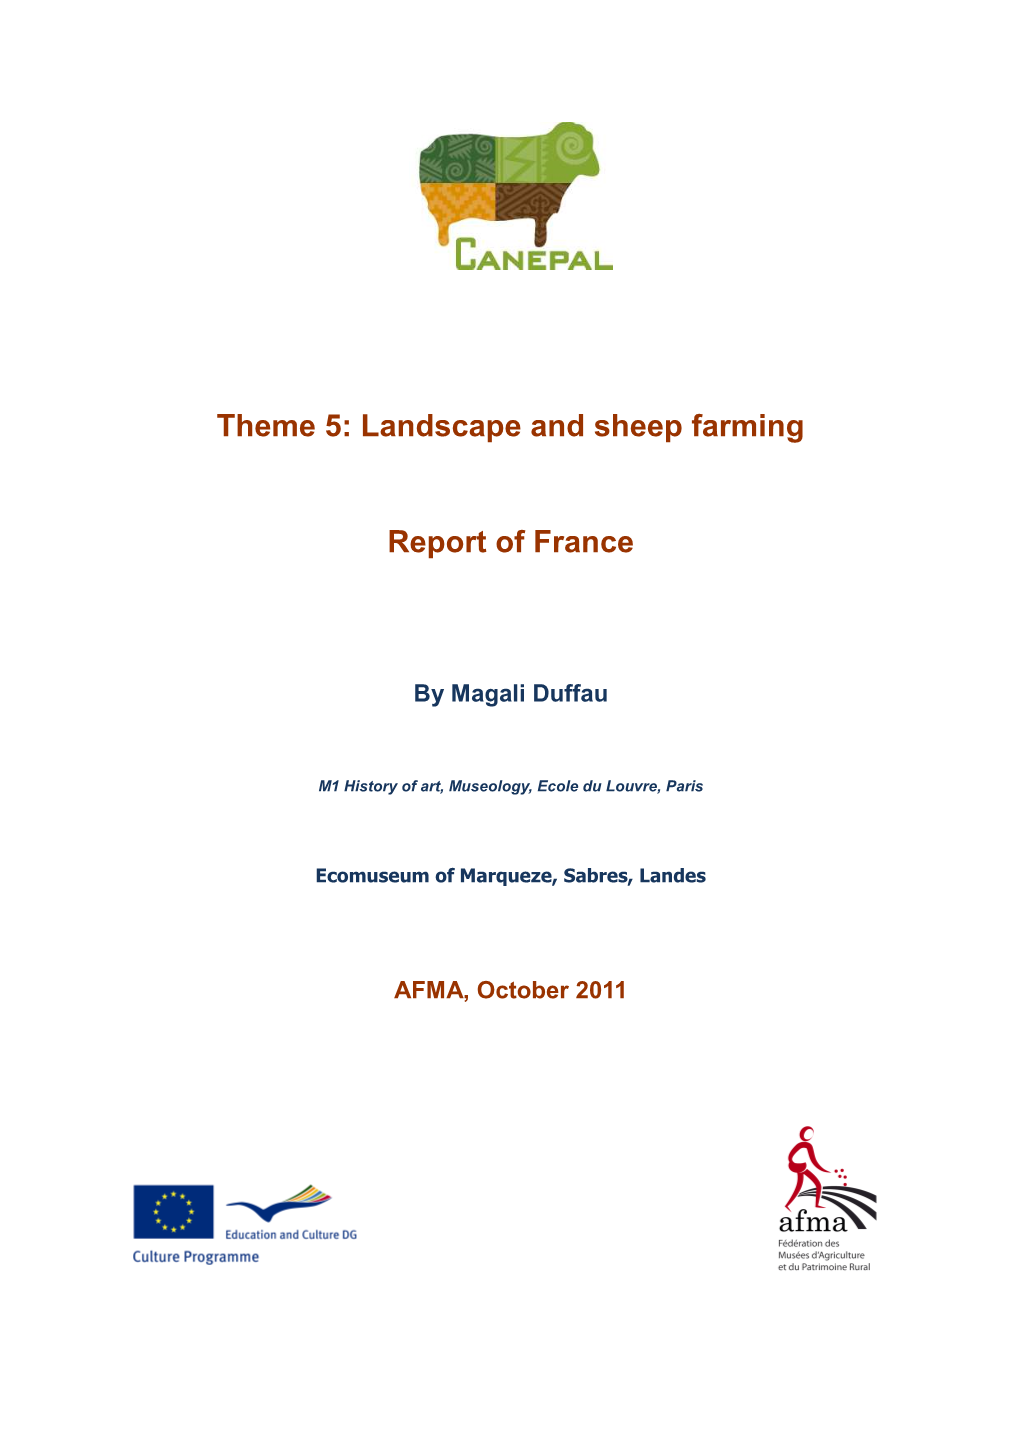 Theme 5: Landscape and Sheep Farming Report of France